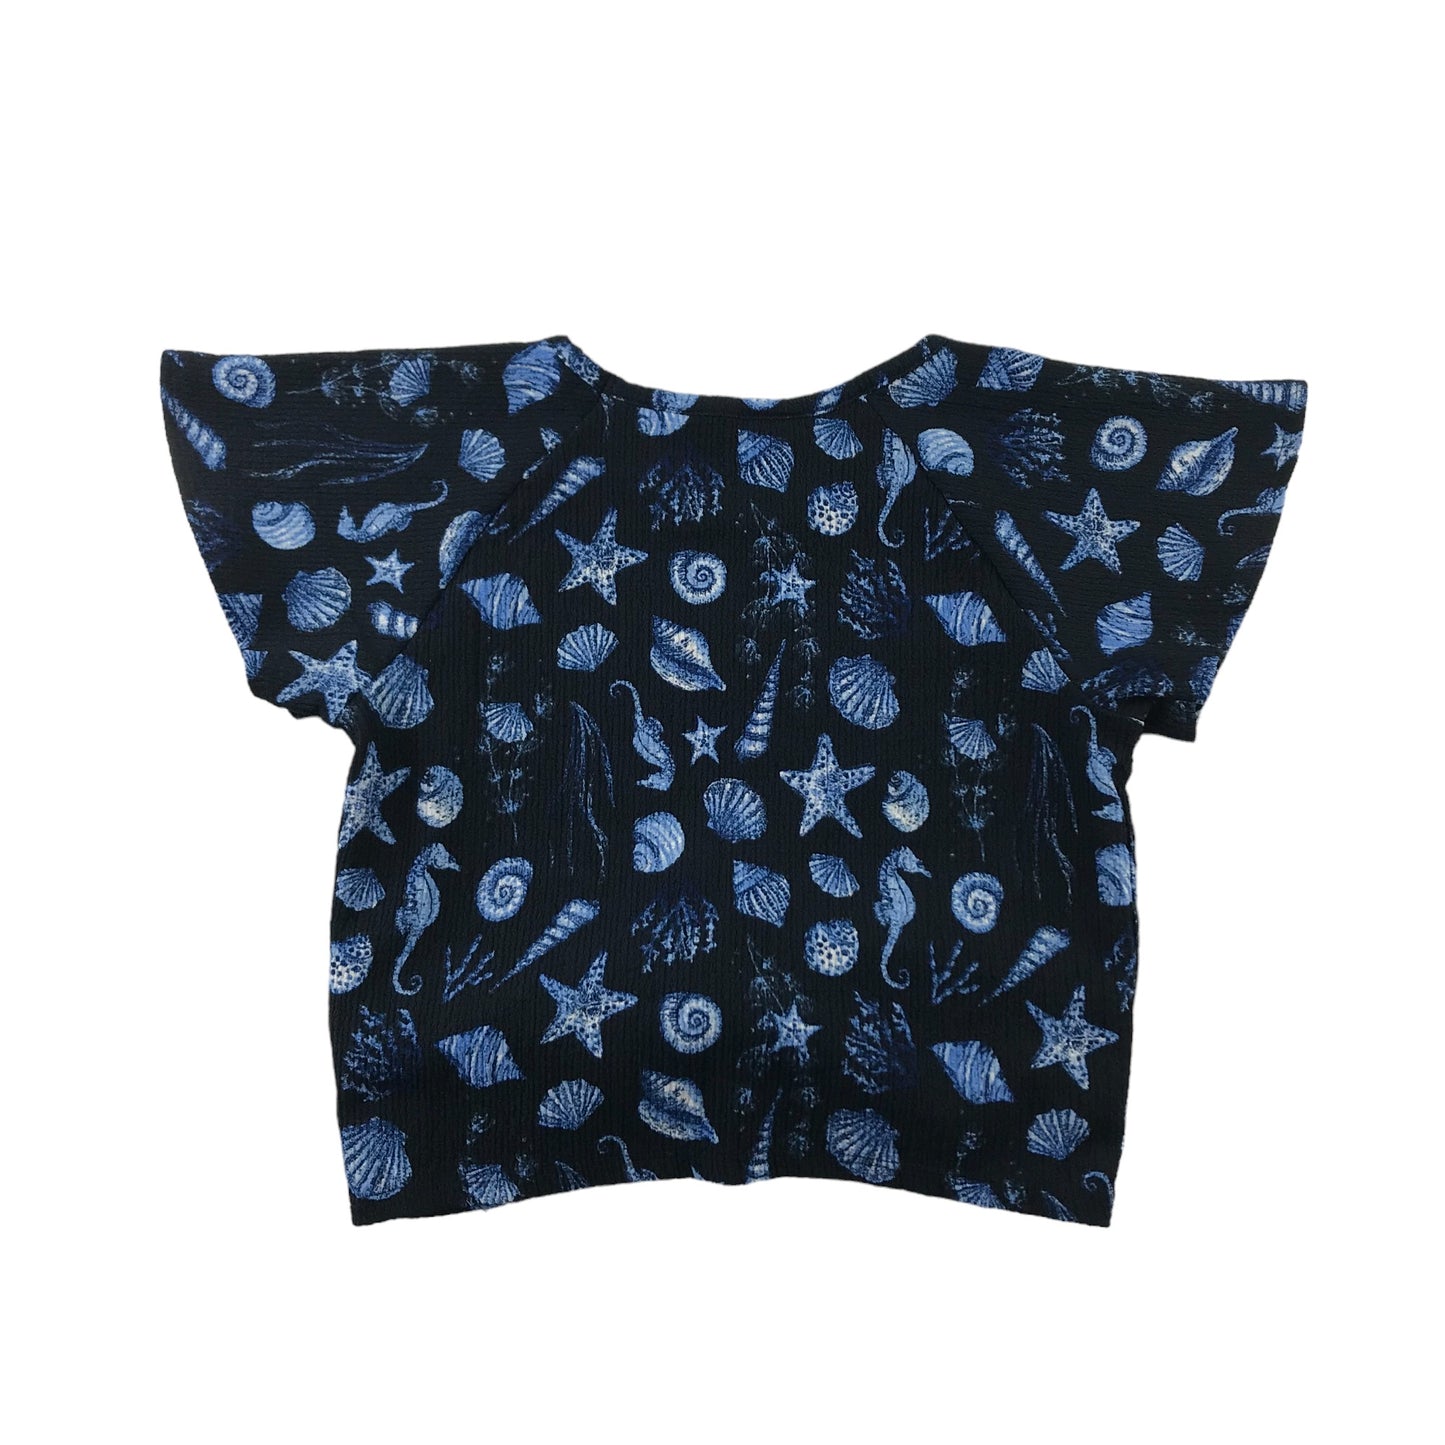 H&M Top Age 8 Black and Blue Seashell Pattern Cropped